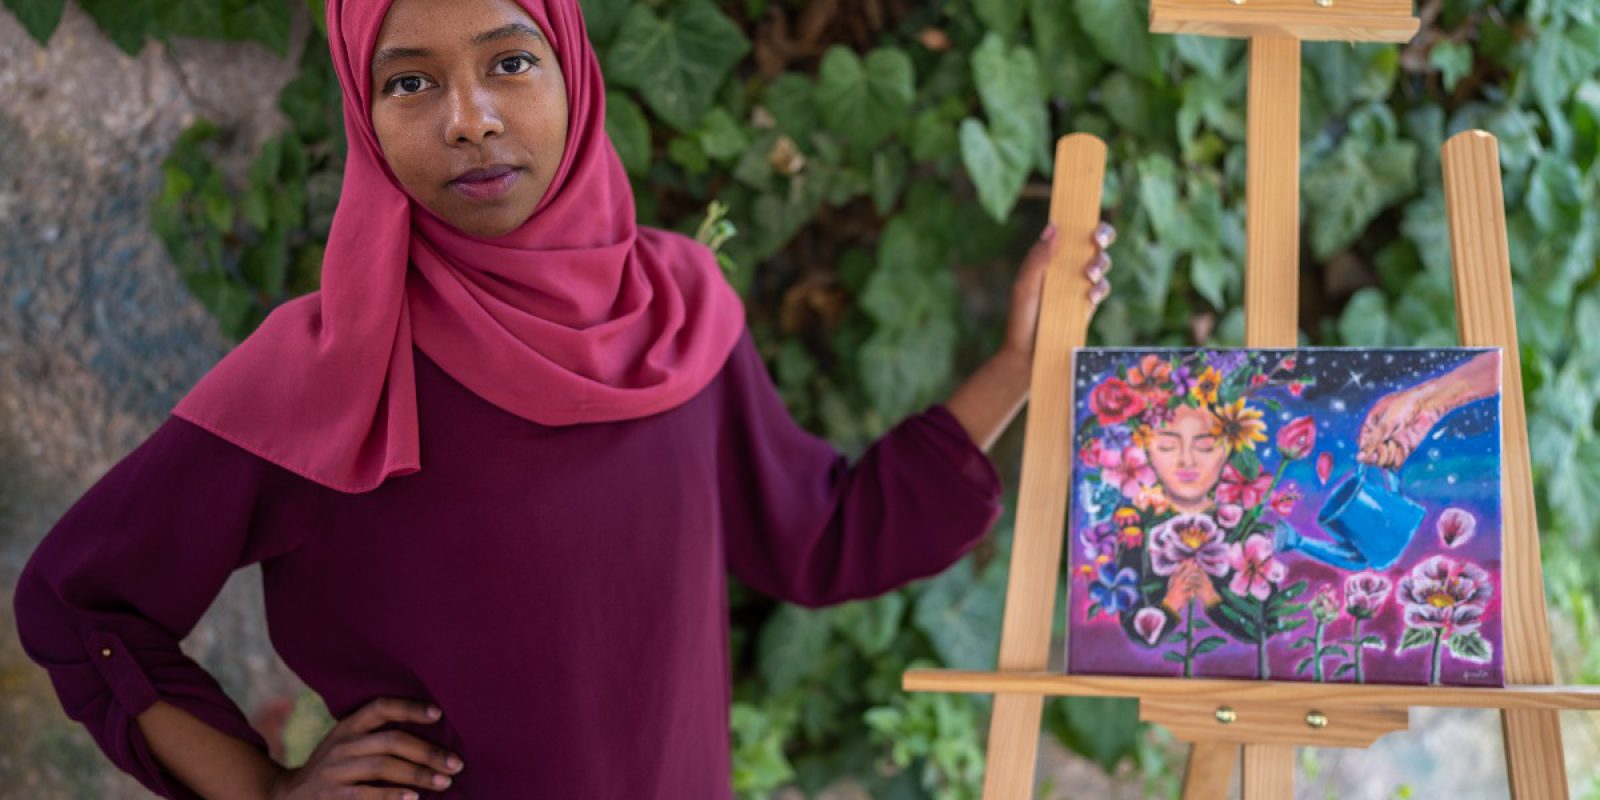 Fowza poses with some of her artwork, at JRS Community Center in Amman. Art for refugees in Jordan is an effective tool for conveying messages and delivering the voice of the voiceless.